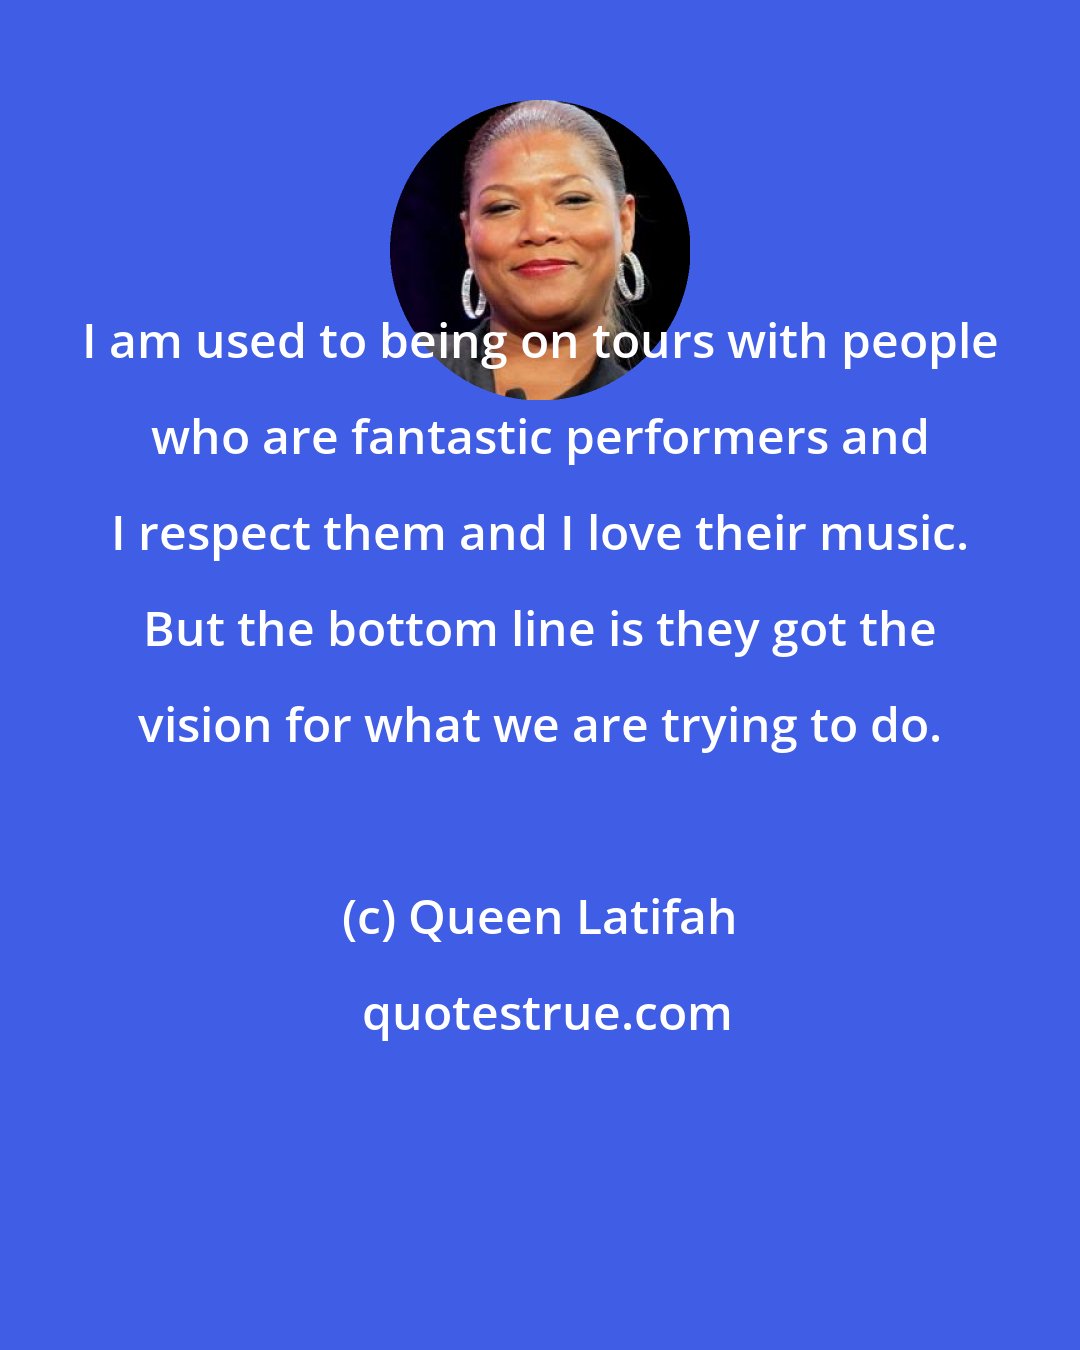 Queen Latifah: I am used to being on tours with people who are fantastic performers and I respect them and I love their music. But the bottom line is they got the vision for what we are trying to do.